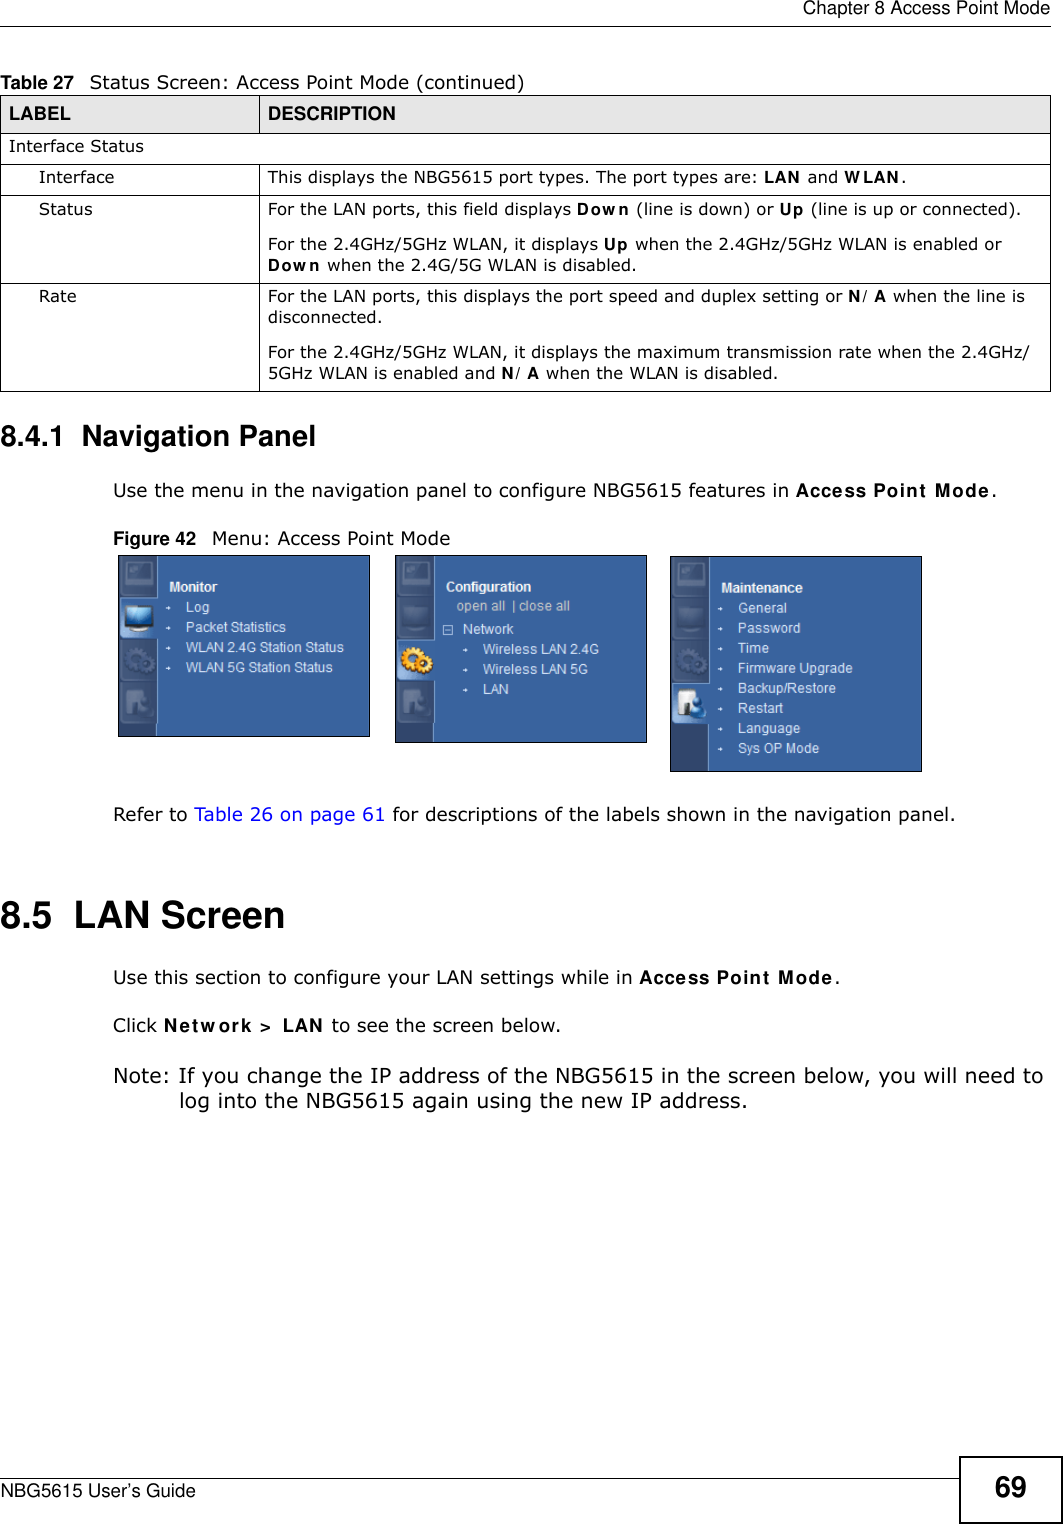  Chapter 8 Access Point ModeNBG5615 User’s Guide 698.4.1  Navigation PanelUse the menu in the navigation panel to configure NBG5615 features in Access Point Mode.Figure 42   Menu: Access Point Mode Refer to Table 26 on page 61 for descriptions of the labels shown in the navigation panel.8.5  LAN ScreenUse this section to configure your LAN settings while in Access Point Mode. Click Netw ork &gt;  LAN to see the screen below.Note: If you change the IP address of the NBG5615 in the screen below, you will need to log into the NBG5615 again using the new IP address.Interface StatusInterface This displays the NBG5615 port types. The port types are: LAN and W LAN.Status For the LAN ports, this field displays Dow n (line is down) or Up (line is up or connected).For the 2.4GHz/5GHz WLAN, it displays Up when the 2.4GHz/5GHz WLAN is enabled or Dow n when the 2.4G/5G WLAN is disabled.Rate For the LAN ports, this displays the port speed and duplex setting or N/ A when the line is disconnected.For the 2.4GHz/5GHz WLAN, it displays the maximum transmission rate when the 2.4GHz/5GHz WLAN is enabled and N/ A when the WLAN is disabled.Table 27   Status Screen: Access Point Mode (continued) LABEL DESCRIPTION